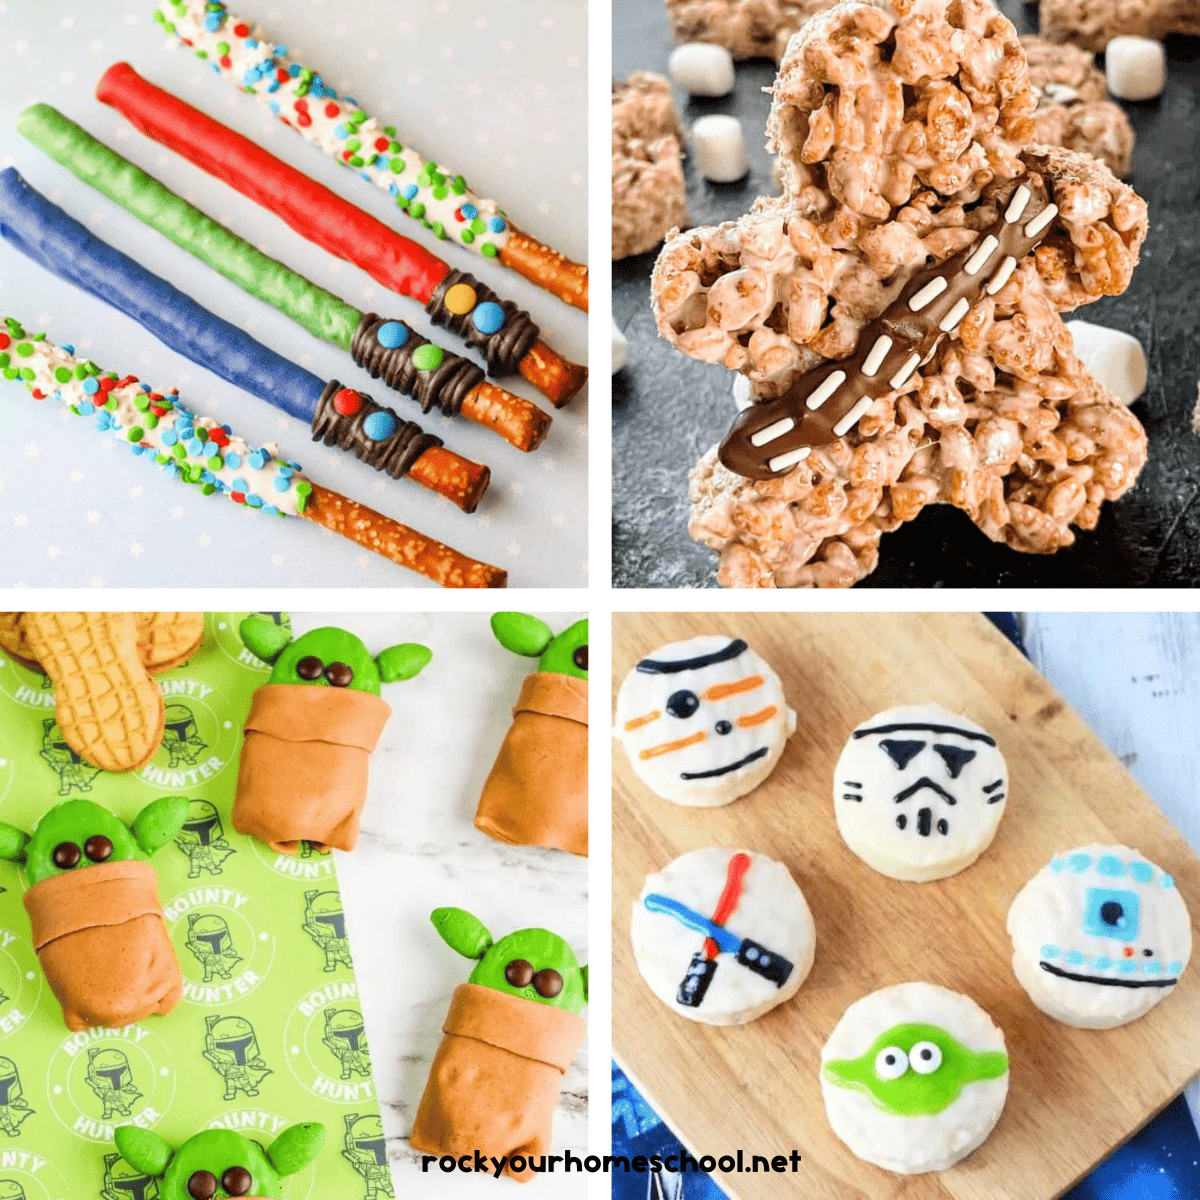 Four examples of Star Wars treats featuring pretzel rod light sabers, Wookiee cookies, Yoda cookies, and variety of cupcakes.